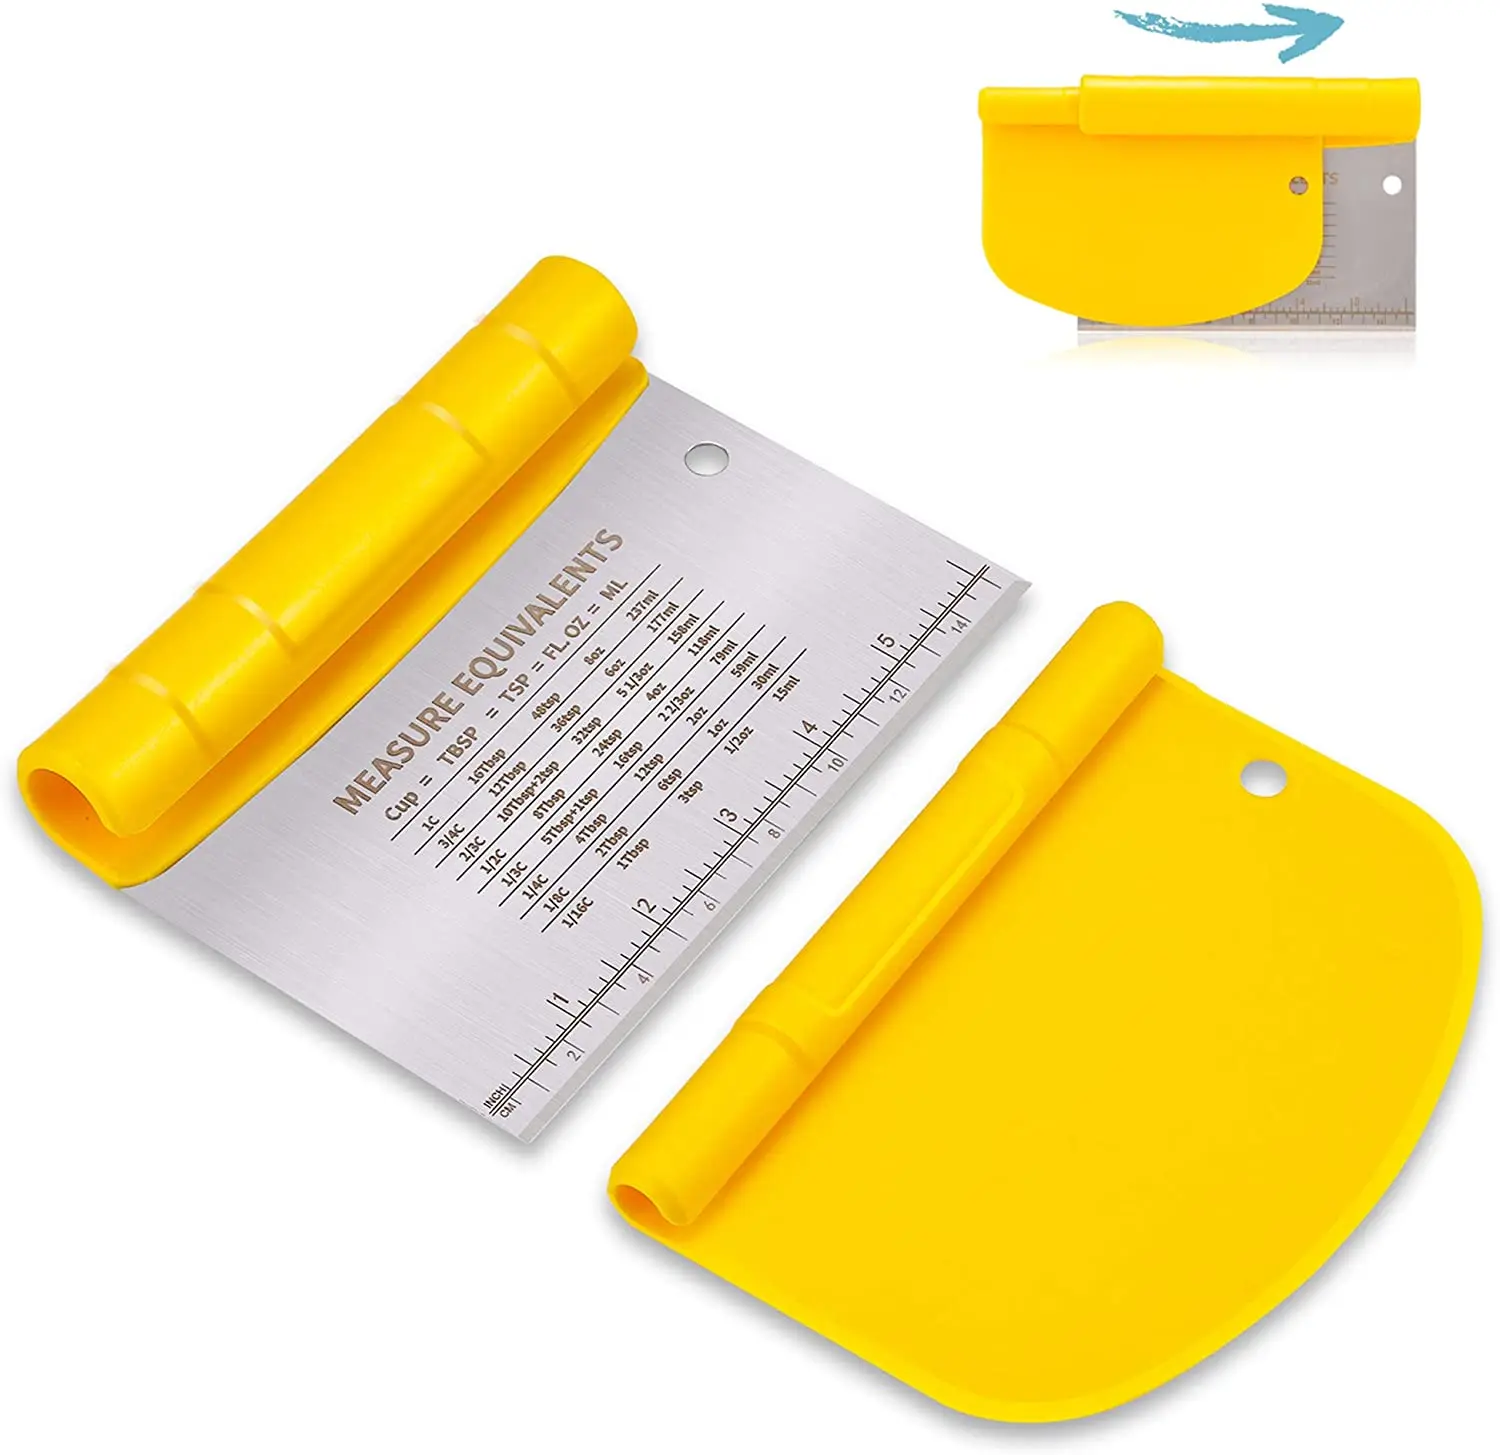 

Flexible 2In1 Dough Pastry Scraper, Stainless Steel Dough Cutter for Bread Pizza Cake Dough Baking, Yellow